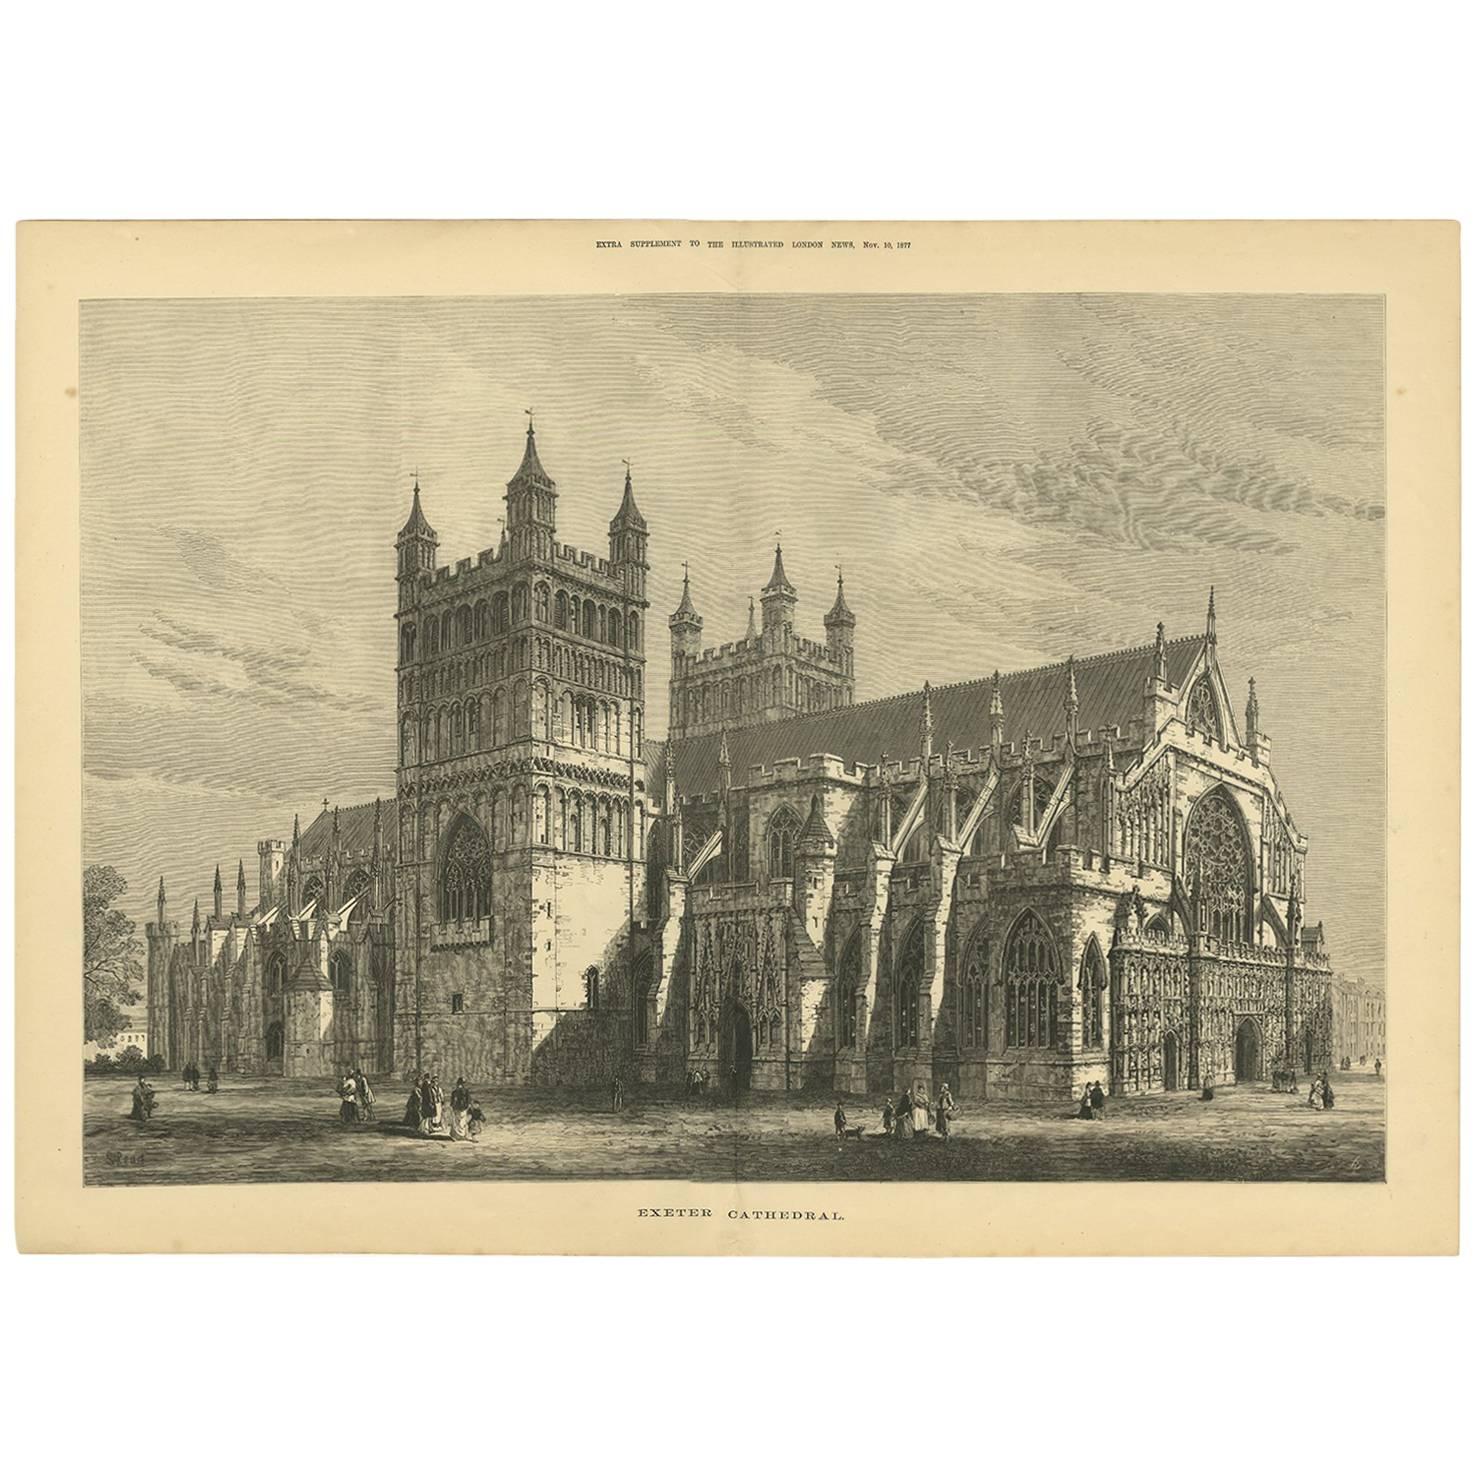 Antique Print of Exeter Cathedral from the Illustrated London News, 1877